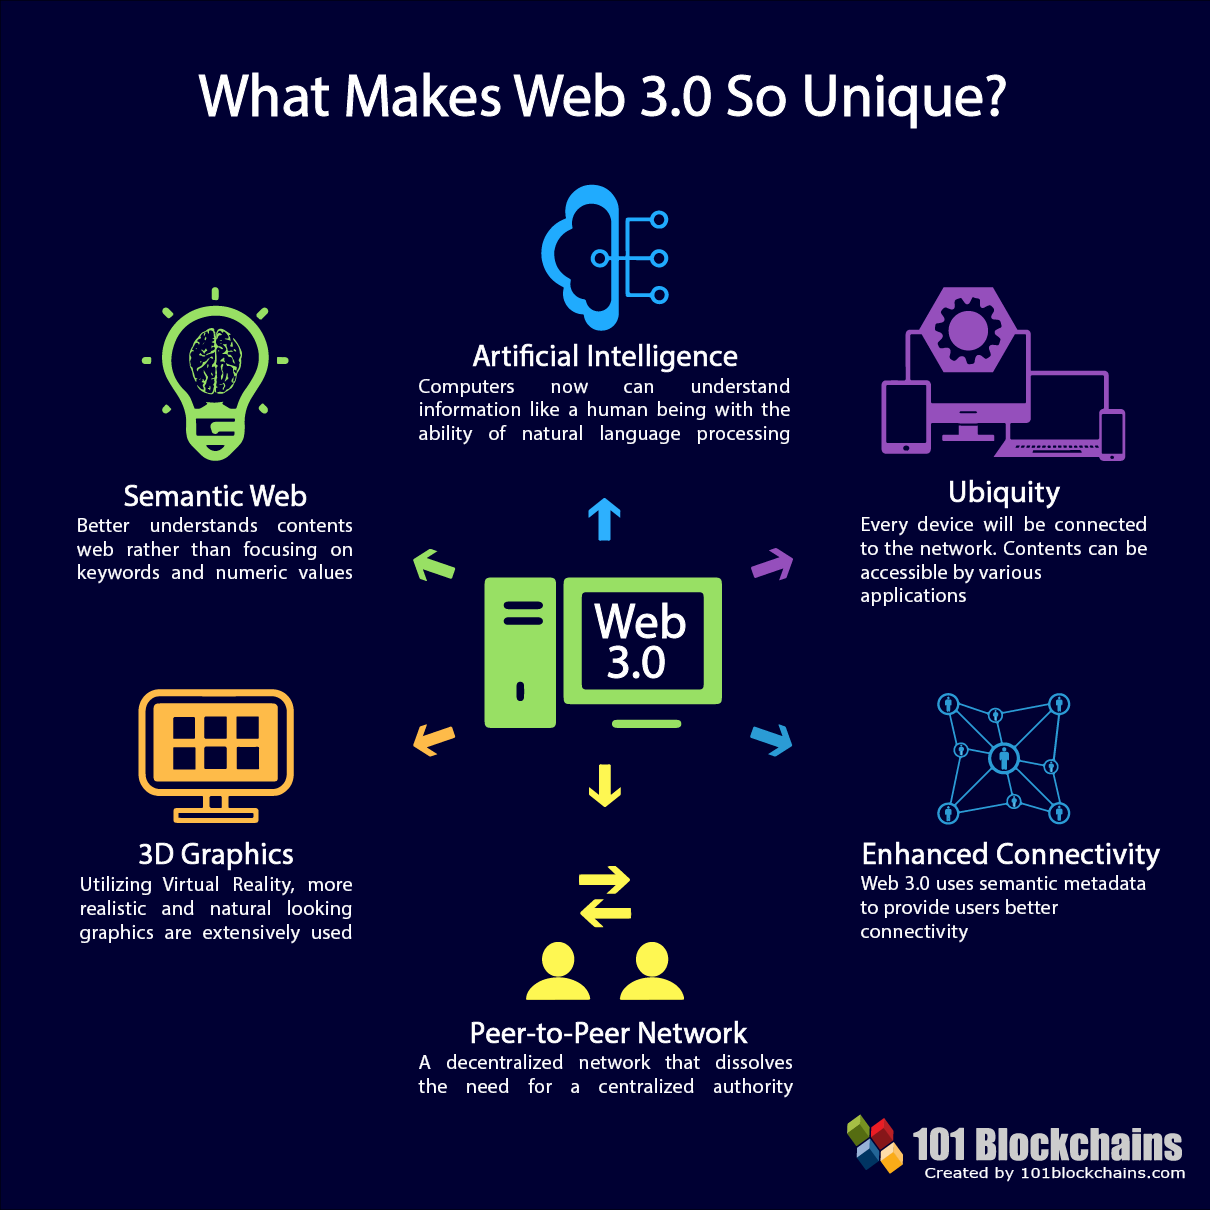 Why is Web 3.0 so exciting?